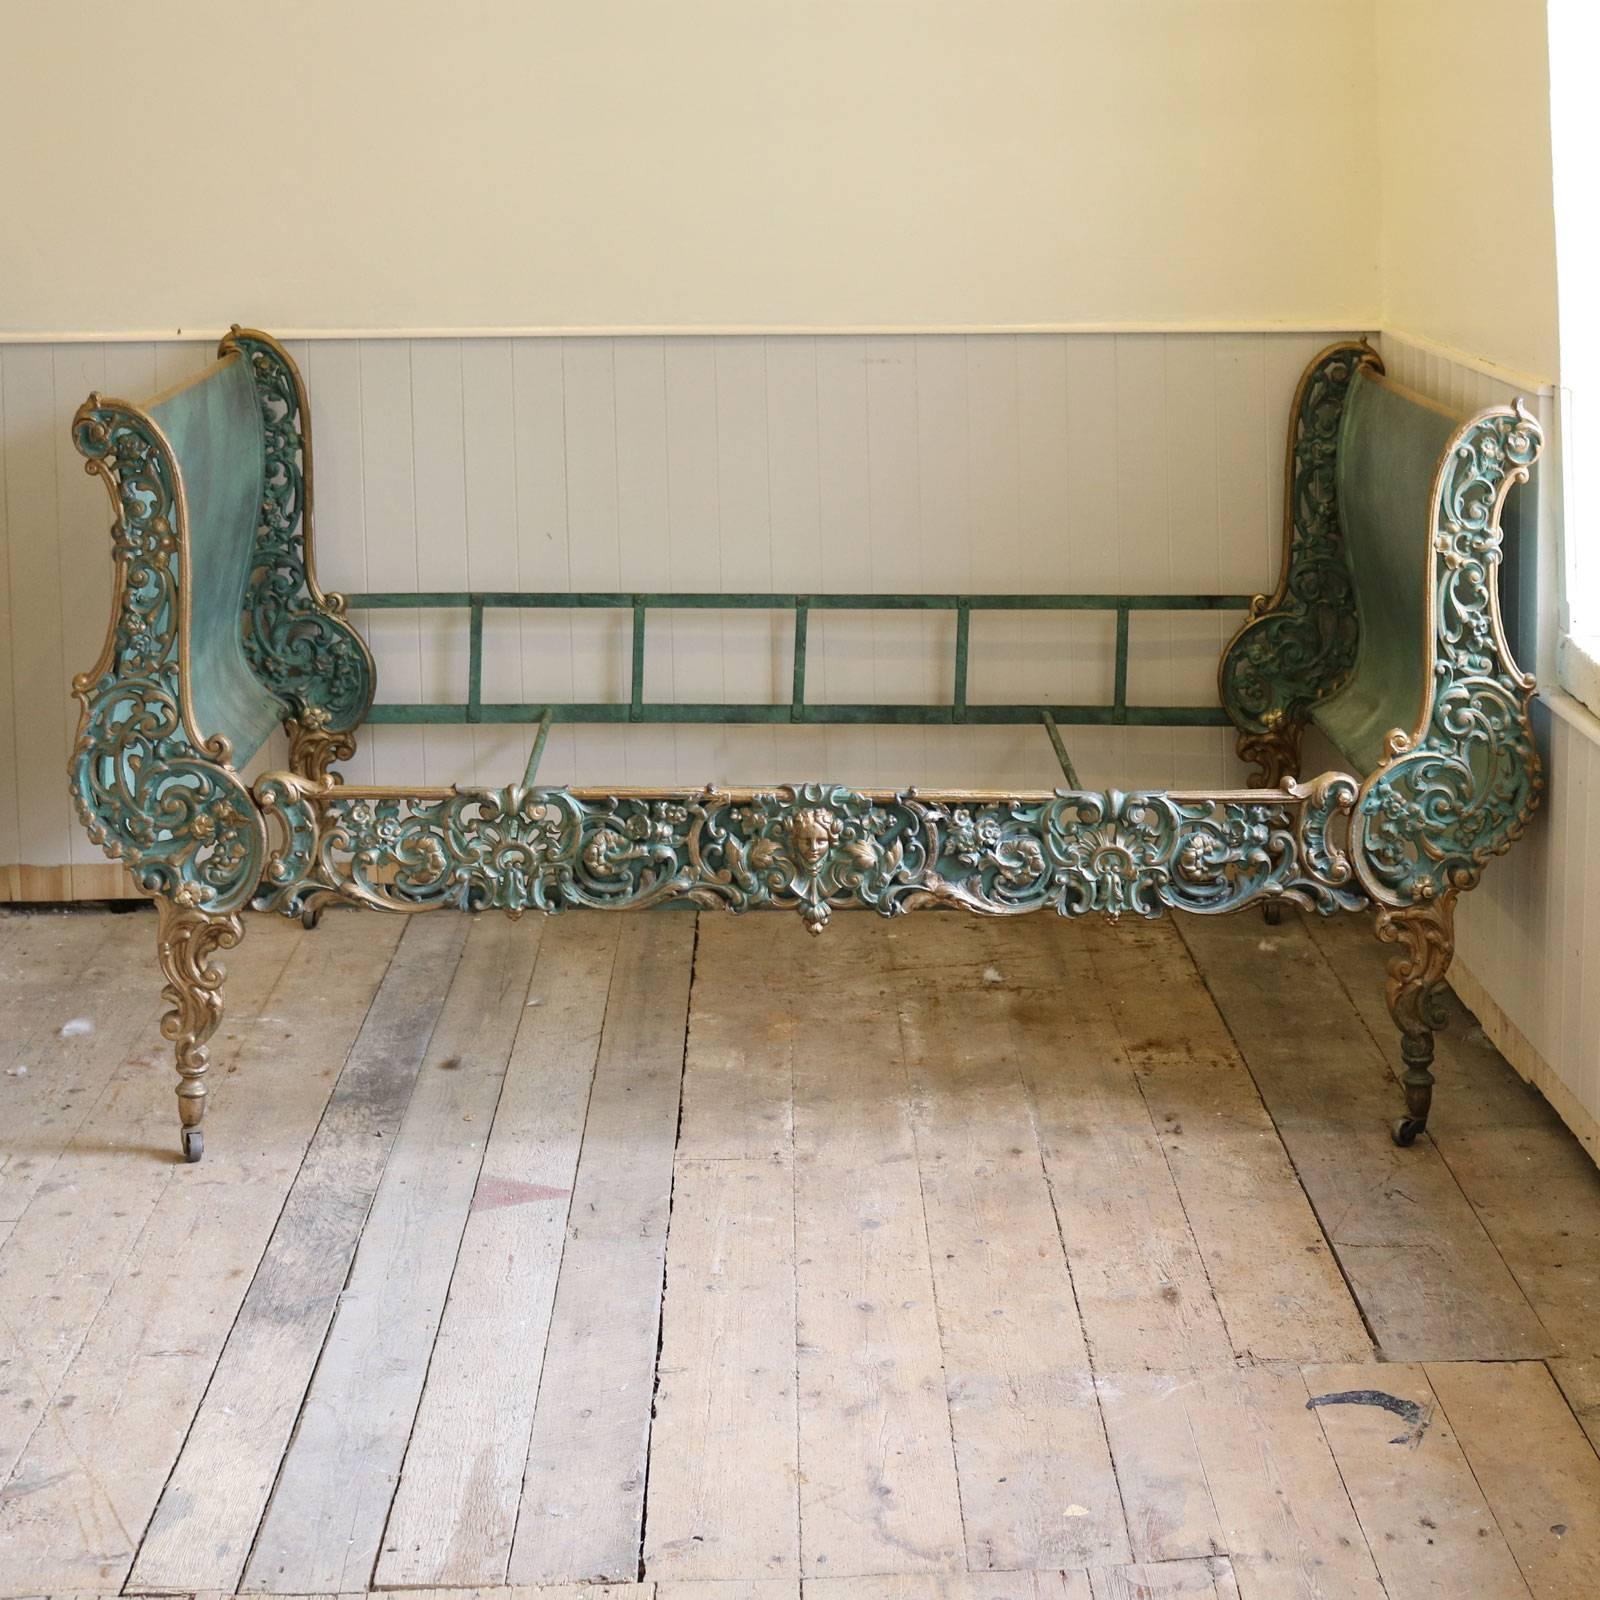 A superb example of a cast iron daybed in the Rococo style with ornate cast sides and front panel and finished in a green Verdigris with gold highlights. 

This versatile piece of furniture can be used as an occasional bed, or a sofa in a sitting